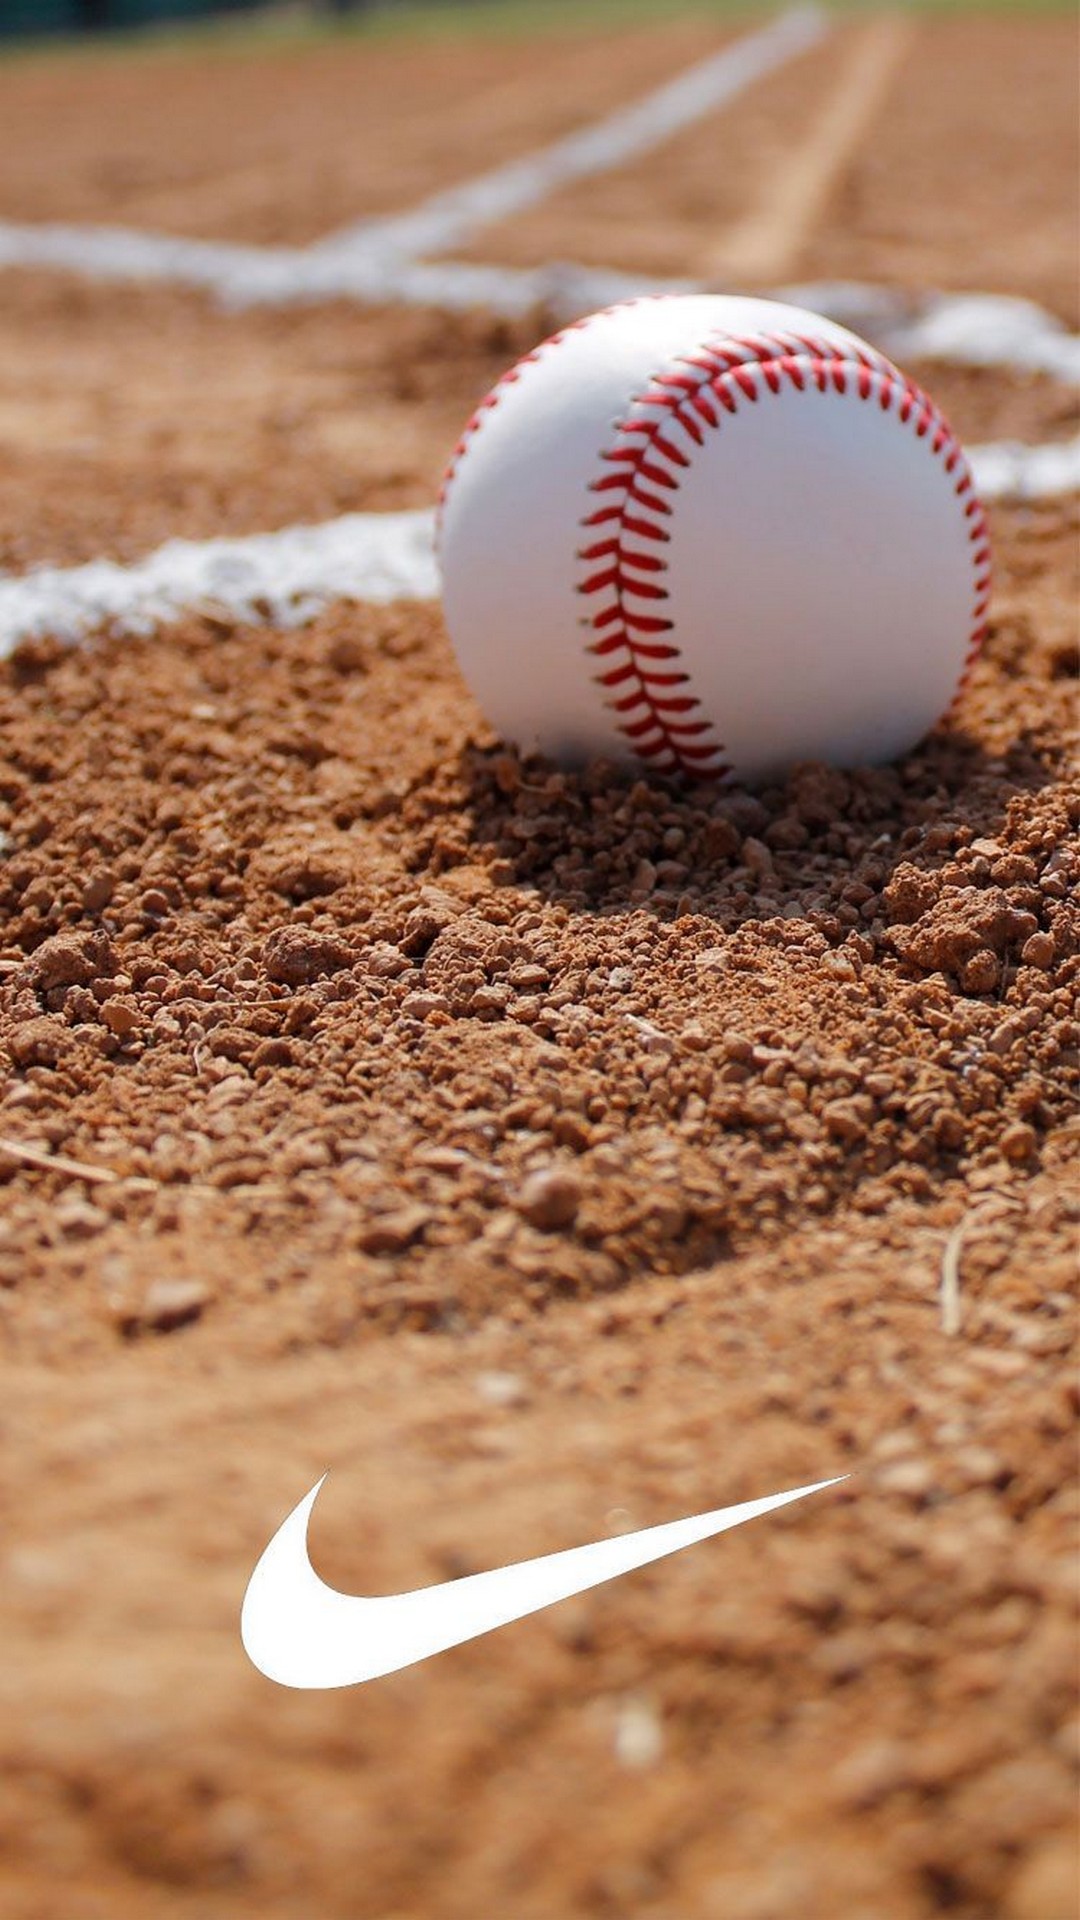 Wallpaper Cool Baseball iPhone with high-resolution 1080x1920 pixel. You can use this wallpaper for Mac Desktop Wallpaper, Laptop Screensavers, Android Wallpapers, Tablet or iPhone Home Screen and another mobile phone device